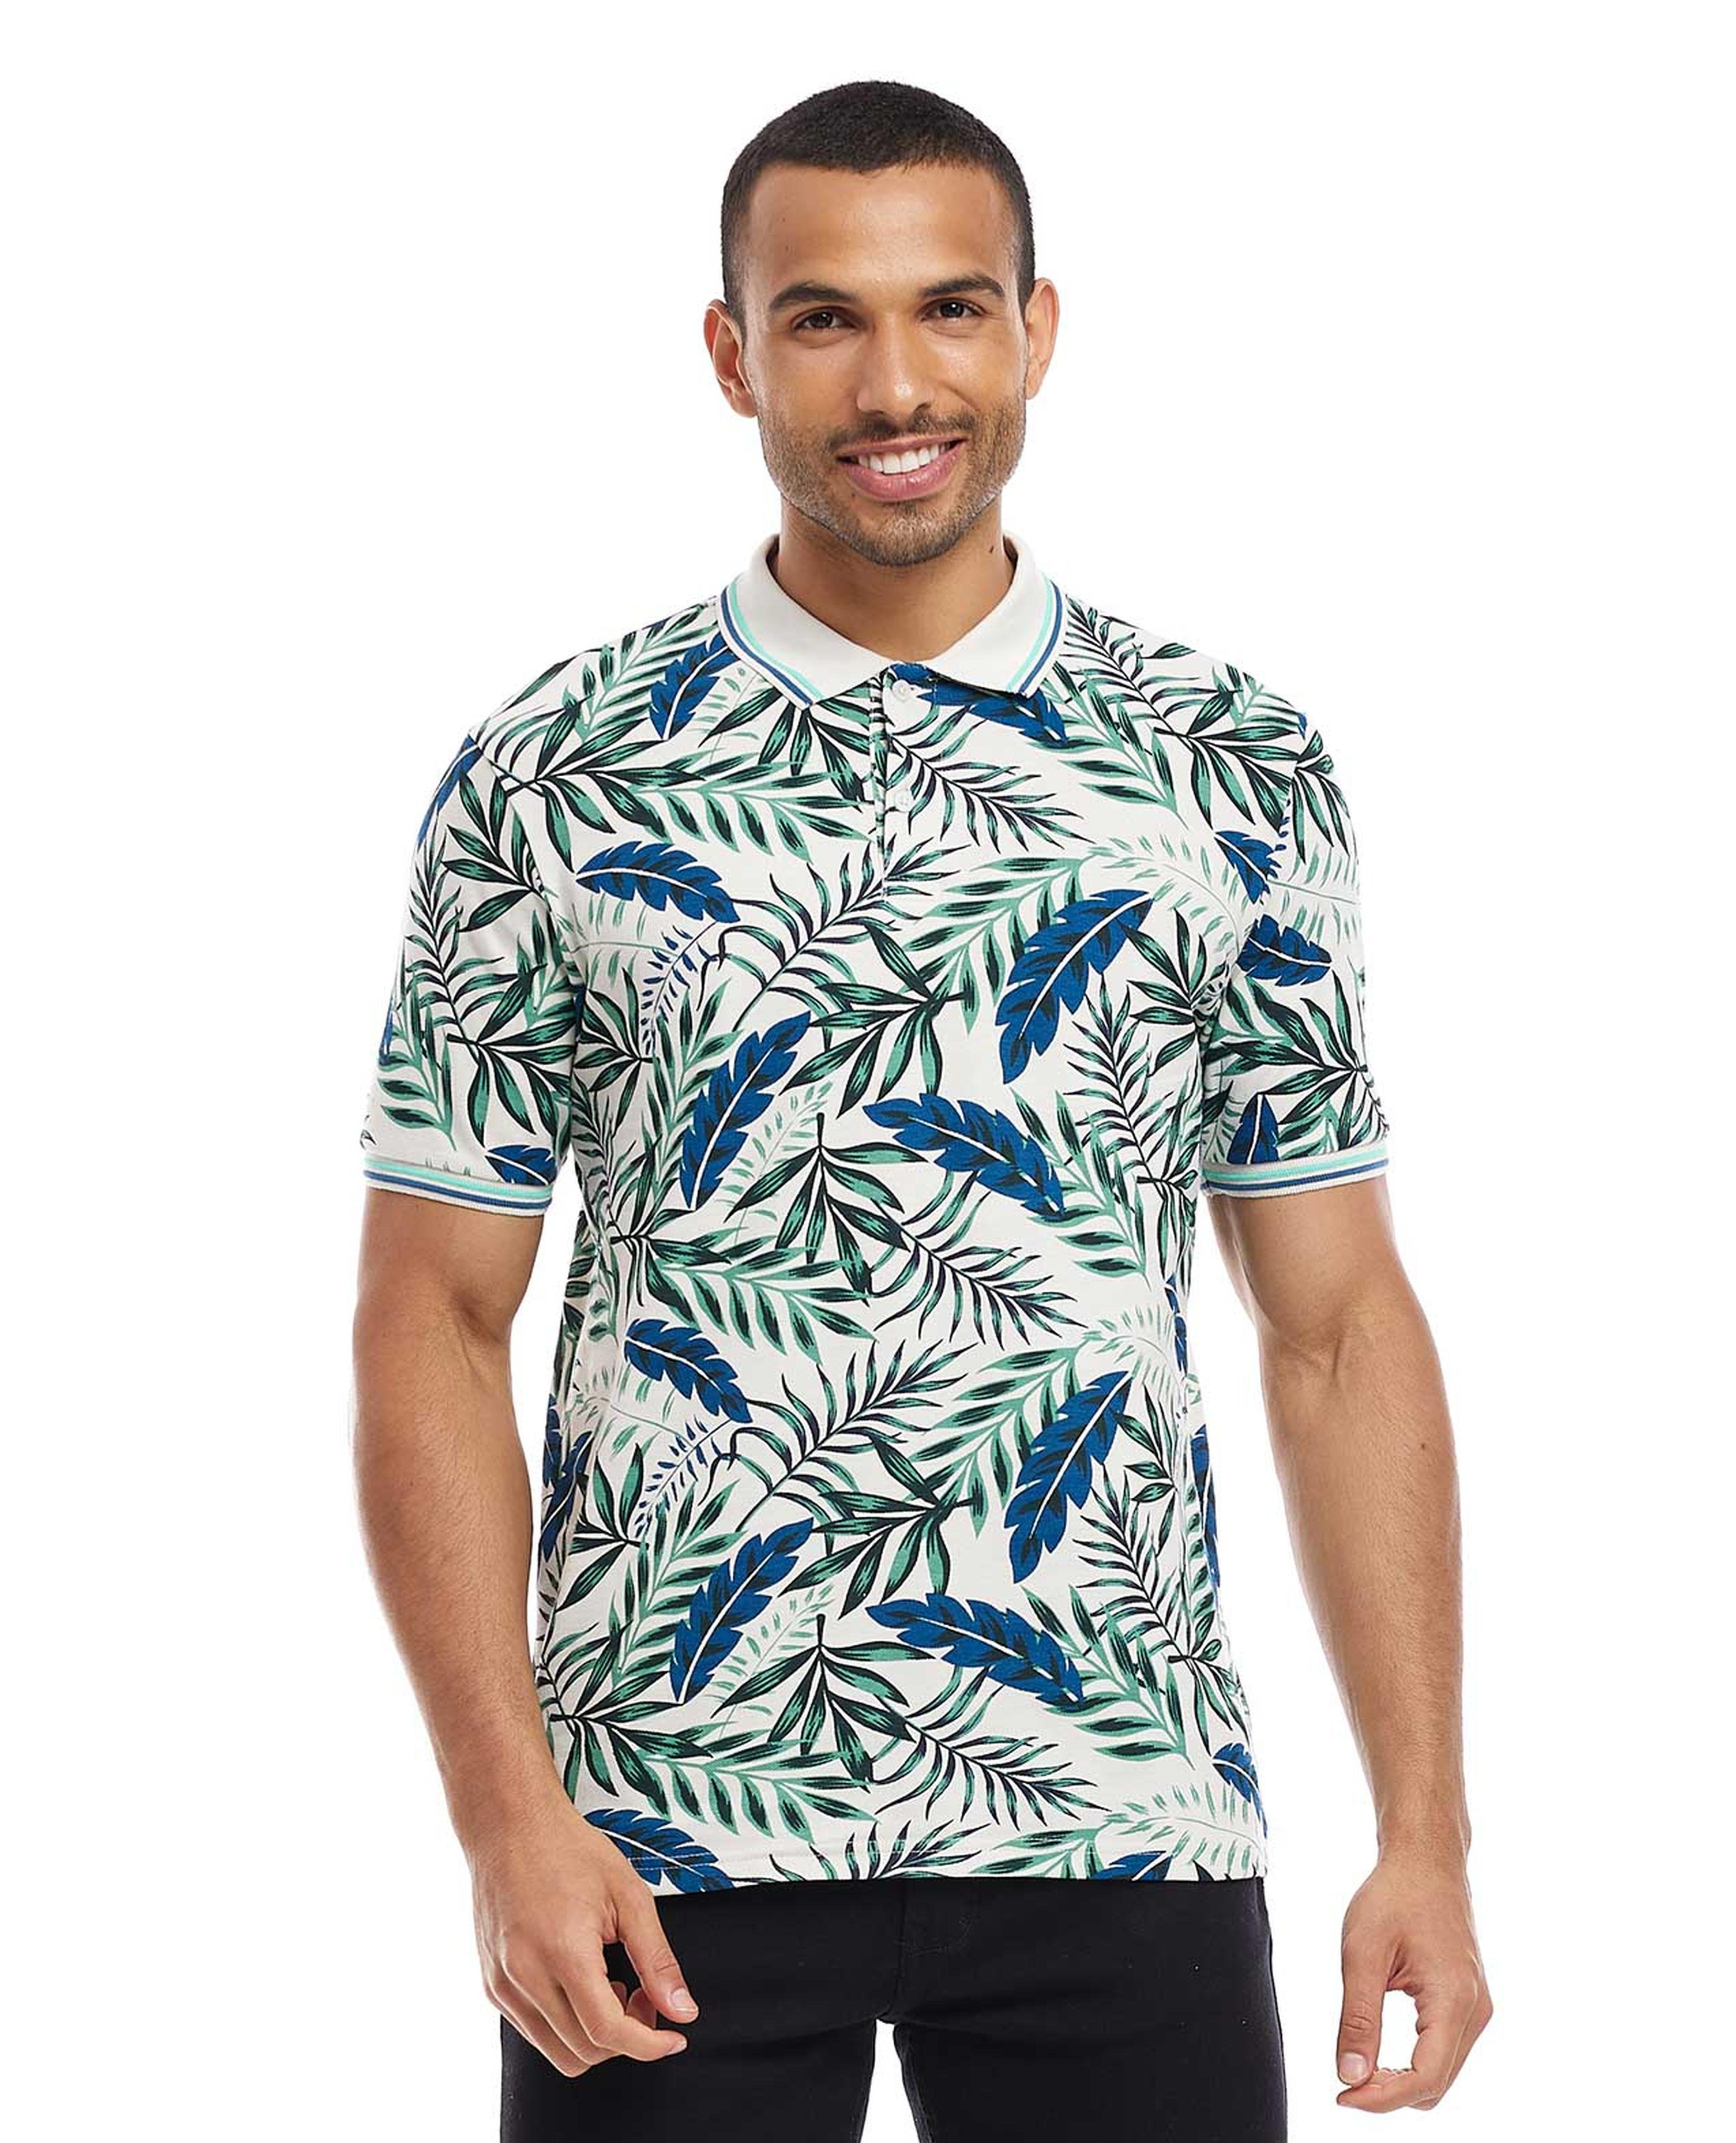 Patterned Polo T-Shirt with Short Sleeves